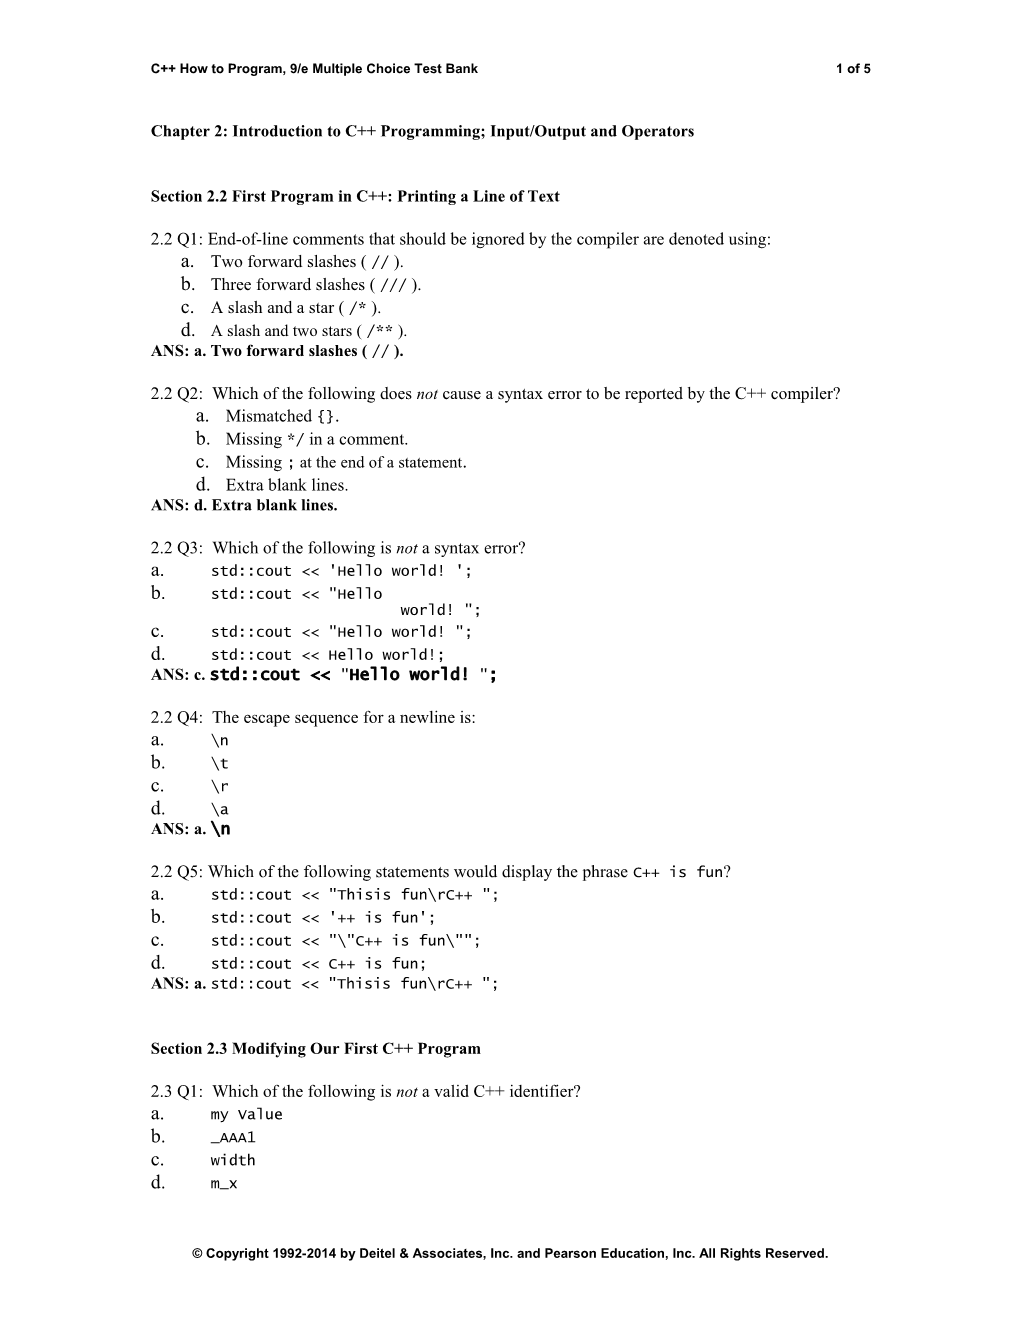 C How to Program, 9/E Multiple Choice Test Bank 1 of 4